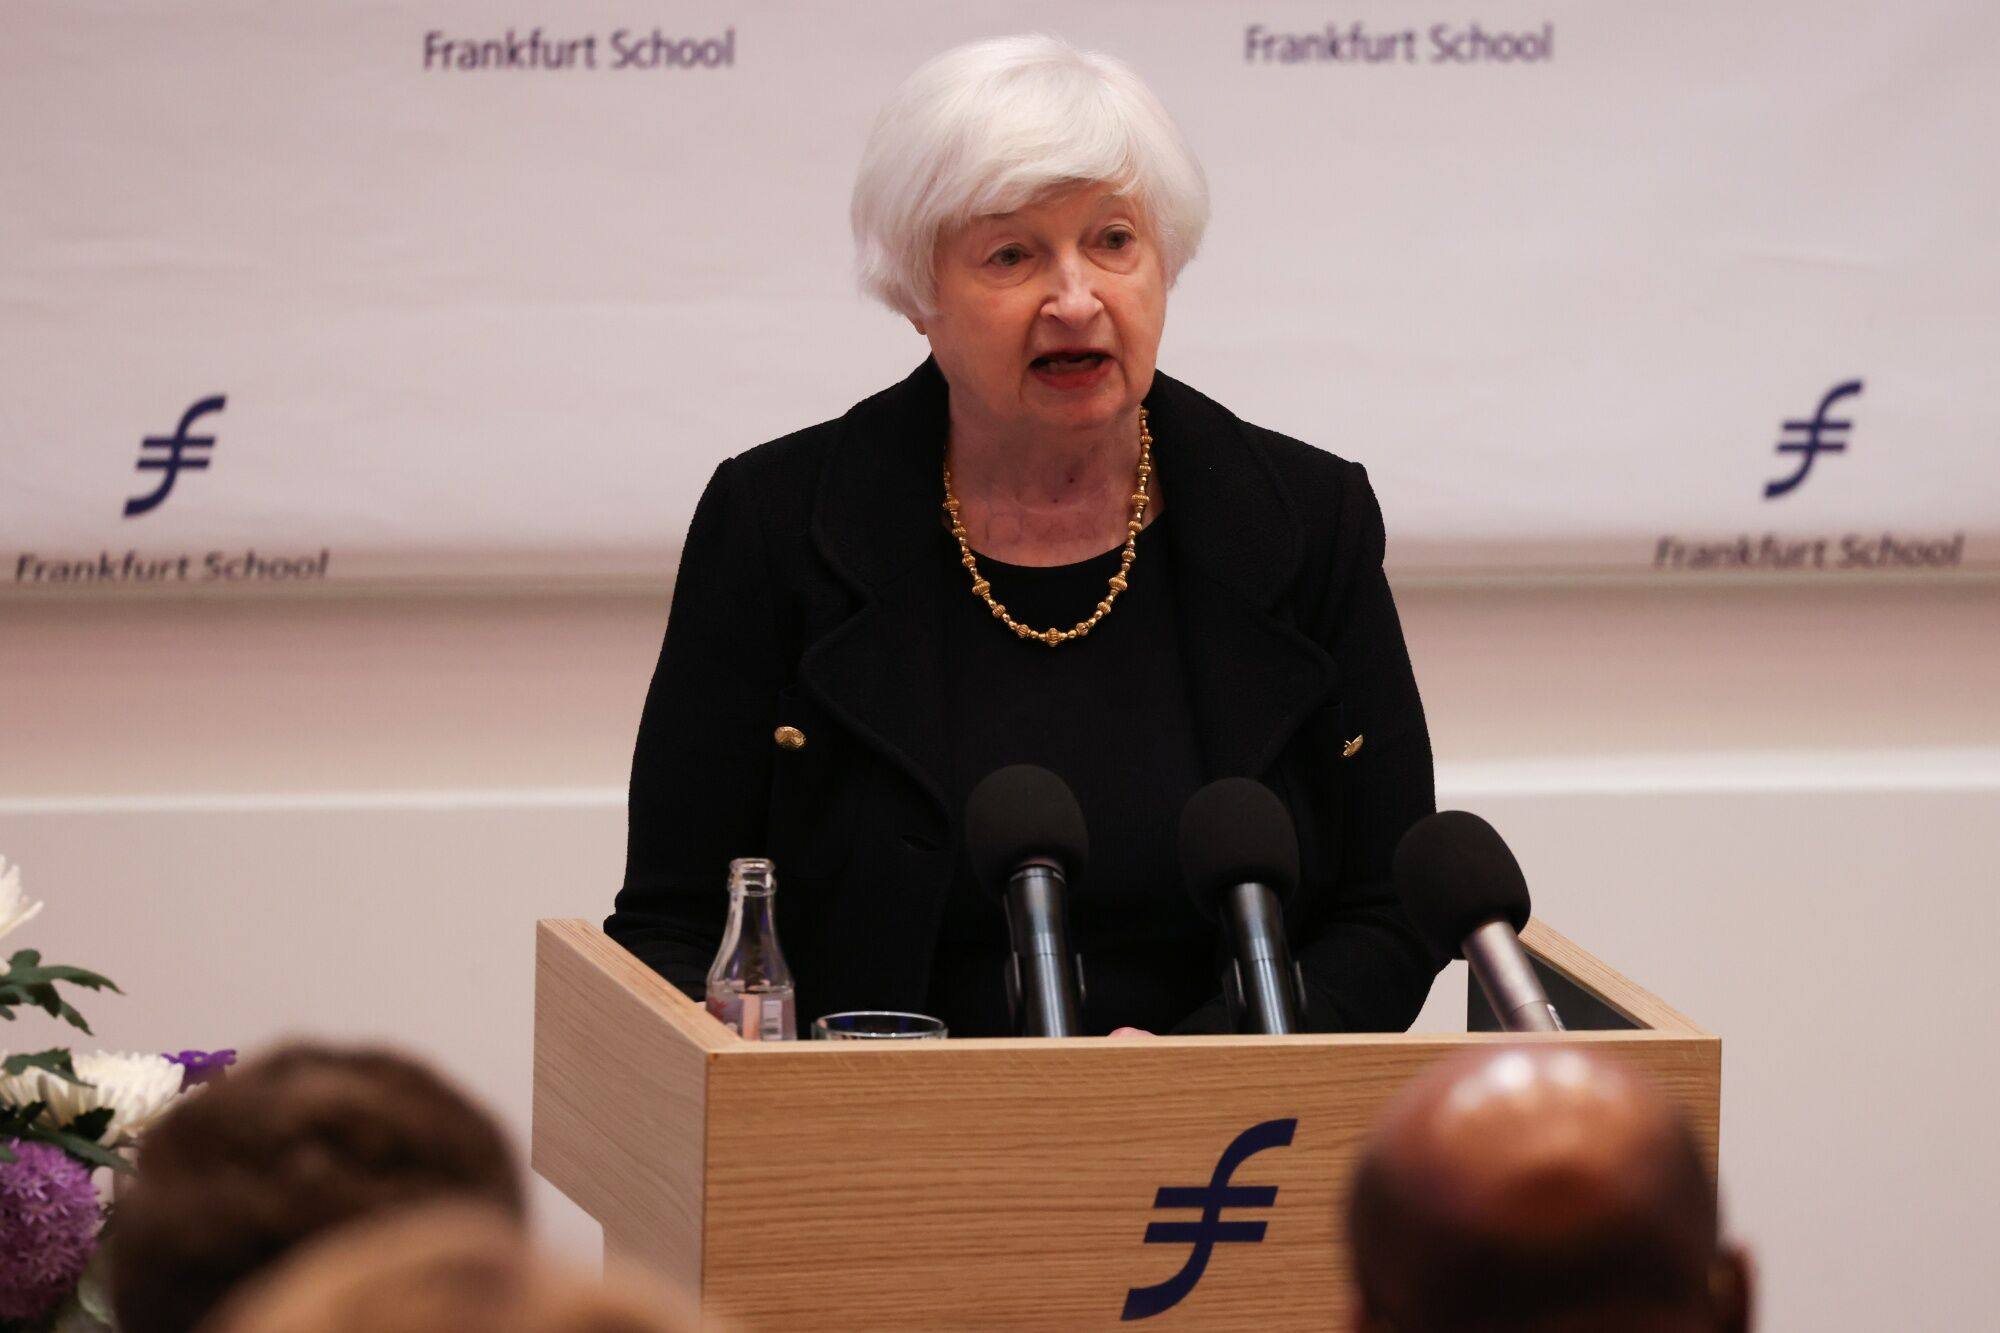 Janet Yellen, US treasury secretary, delivers a speech at the Frankfurt School of Finance and Management in Frankfurt, Germany, on Tuesday. Yellen said the US, Europe must respond in ‘united way’ to China’s overcapacity. Photo: Bloomberg